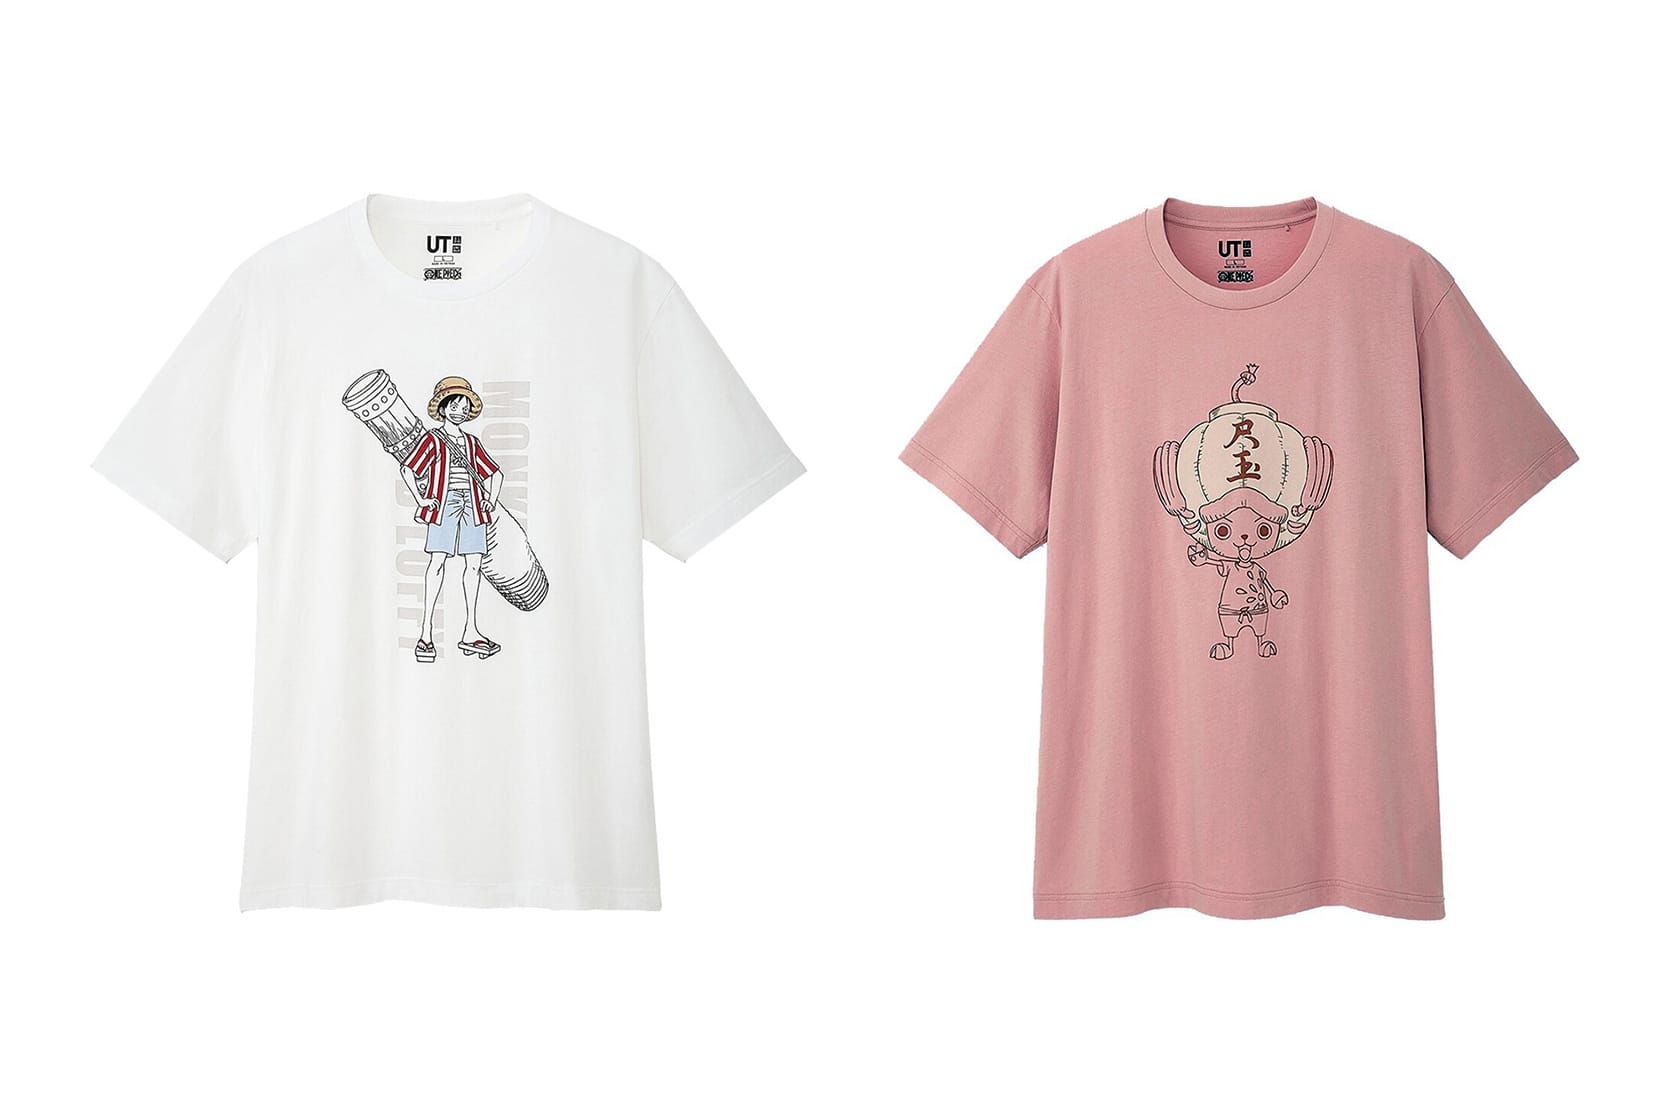 Uniqlo Teams Up With Your Name Anime Director Makoto Shinkai For FirstEver  TShirt Collaboration  Geek Culture